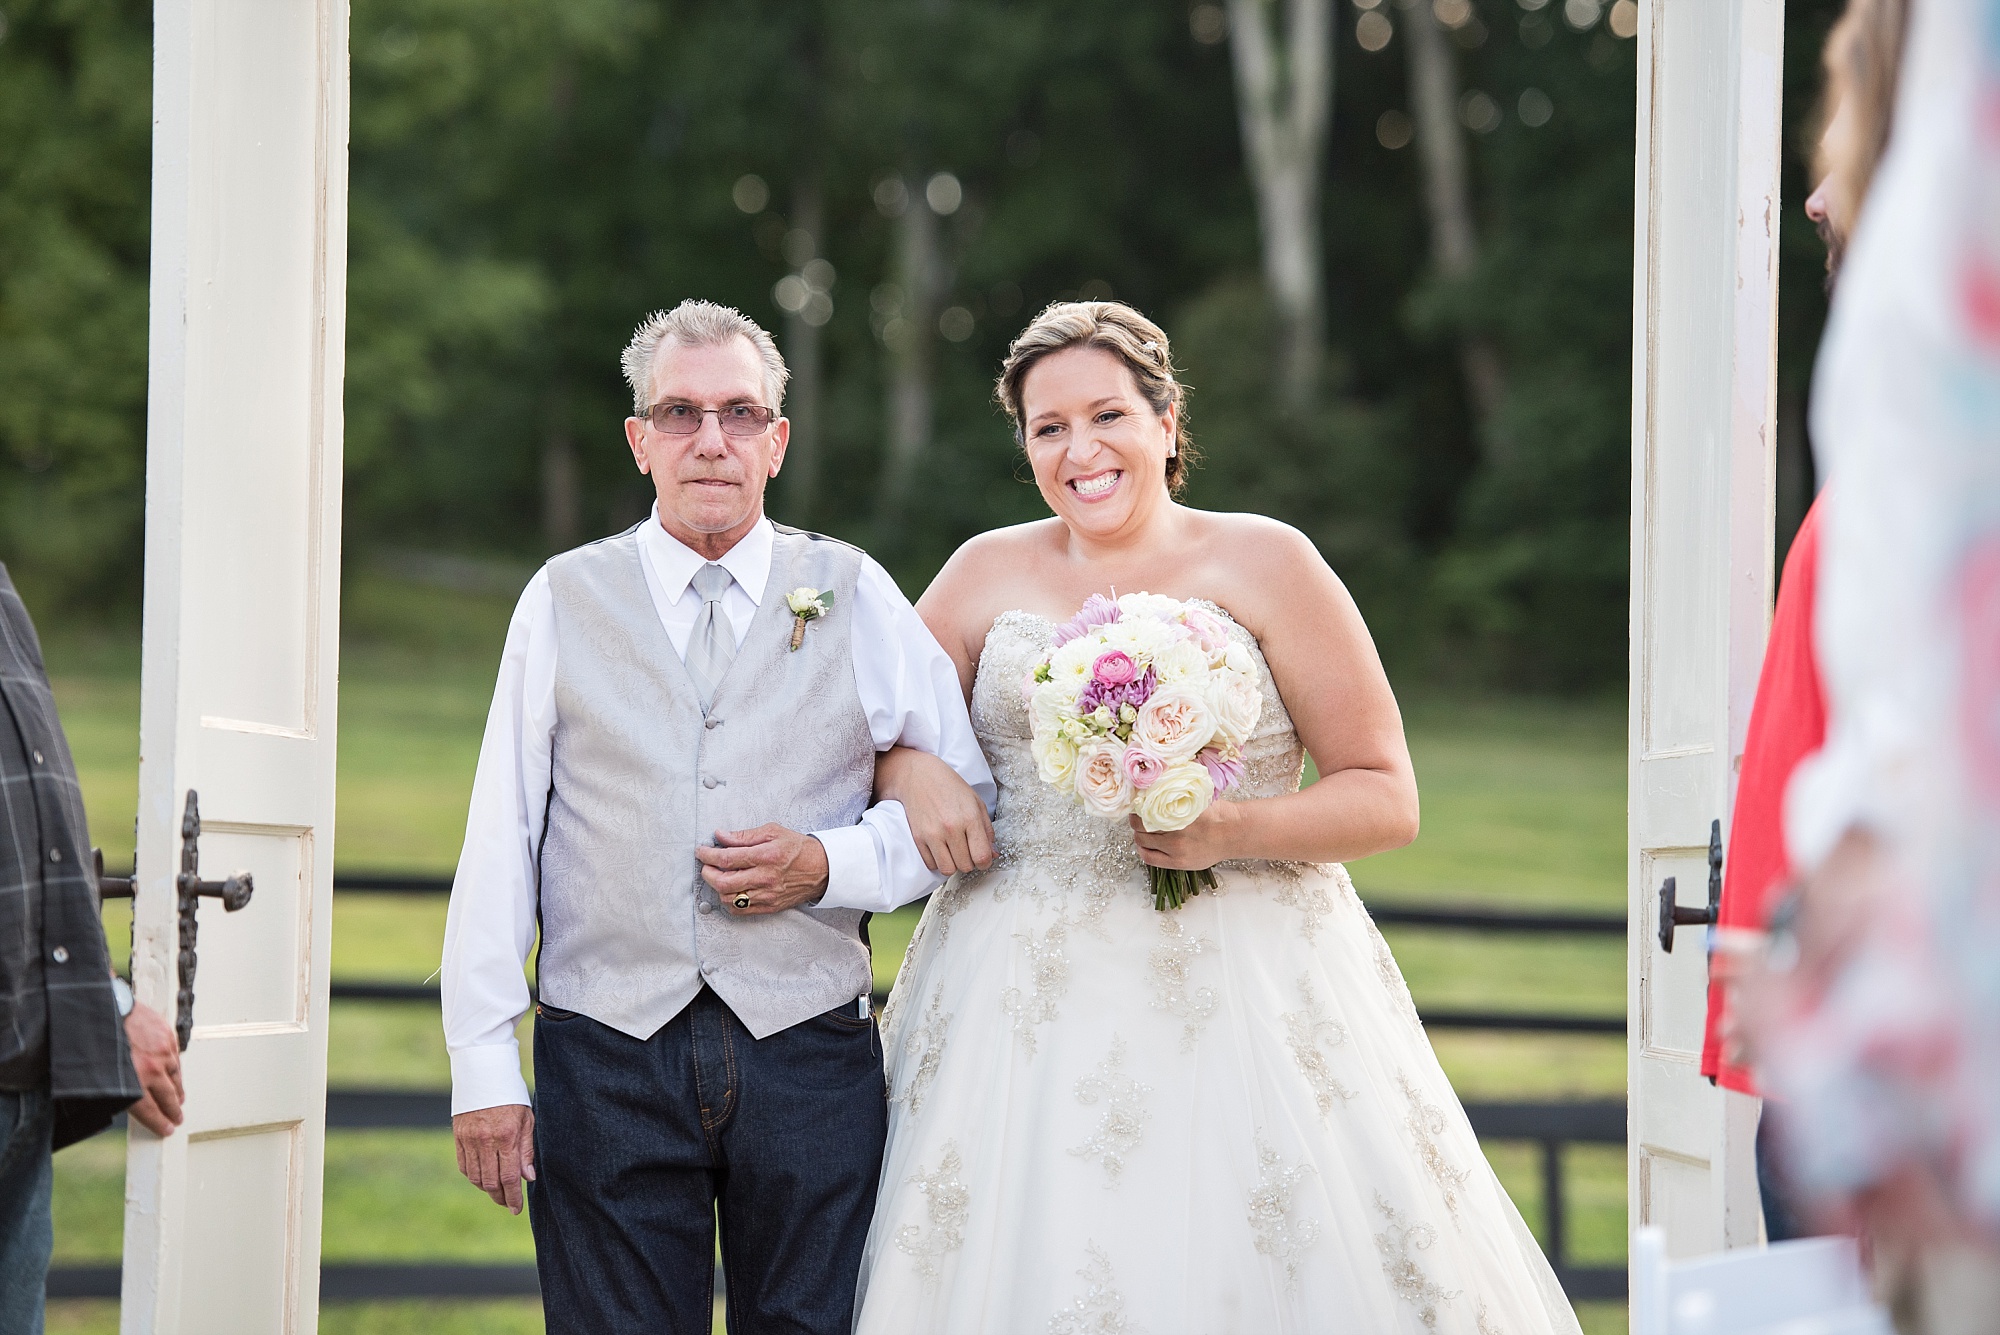 Fall Wedding at Terian Farms outside of Nashville Tennessee Destination Wedding